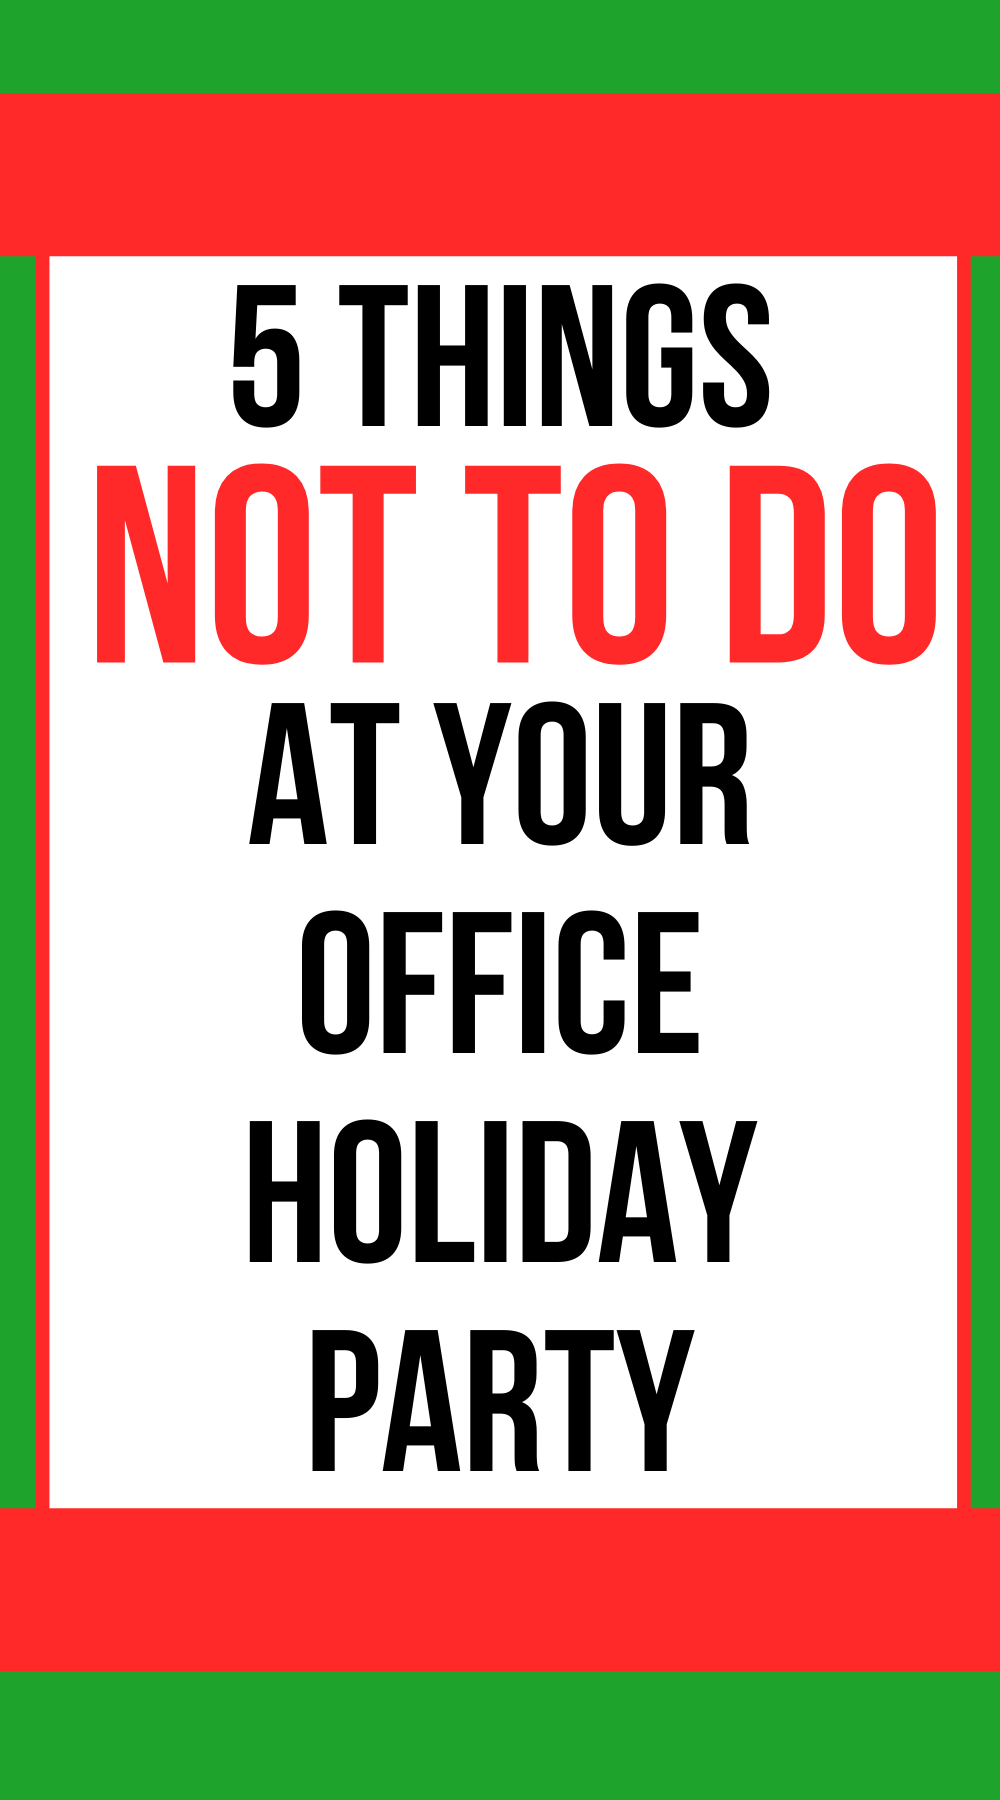 work holiday party office